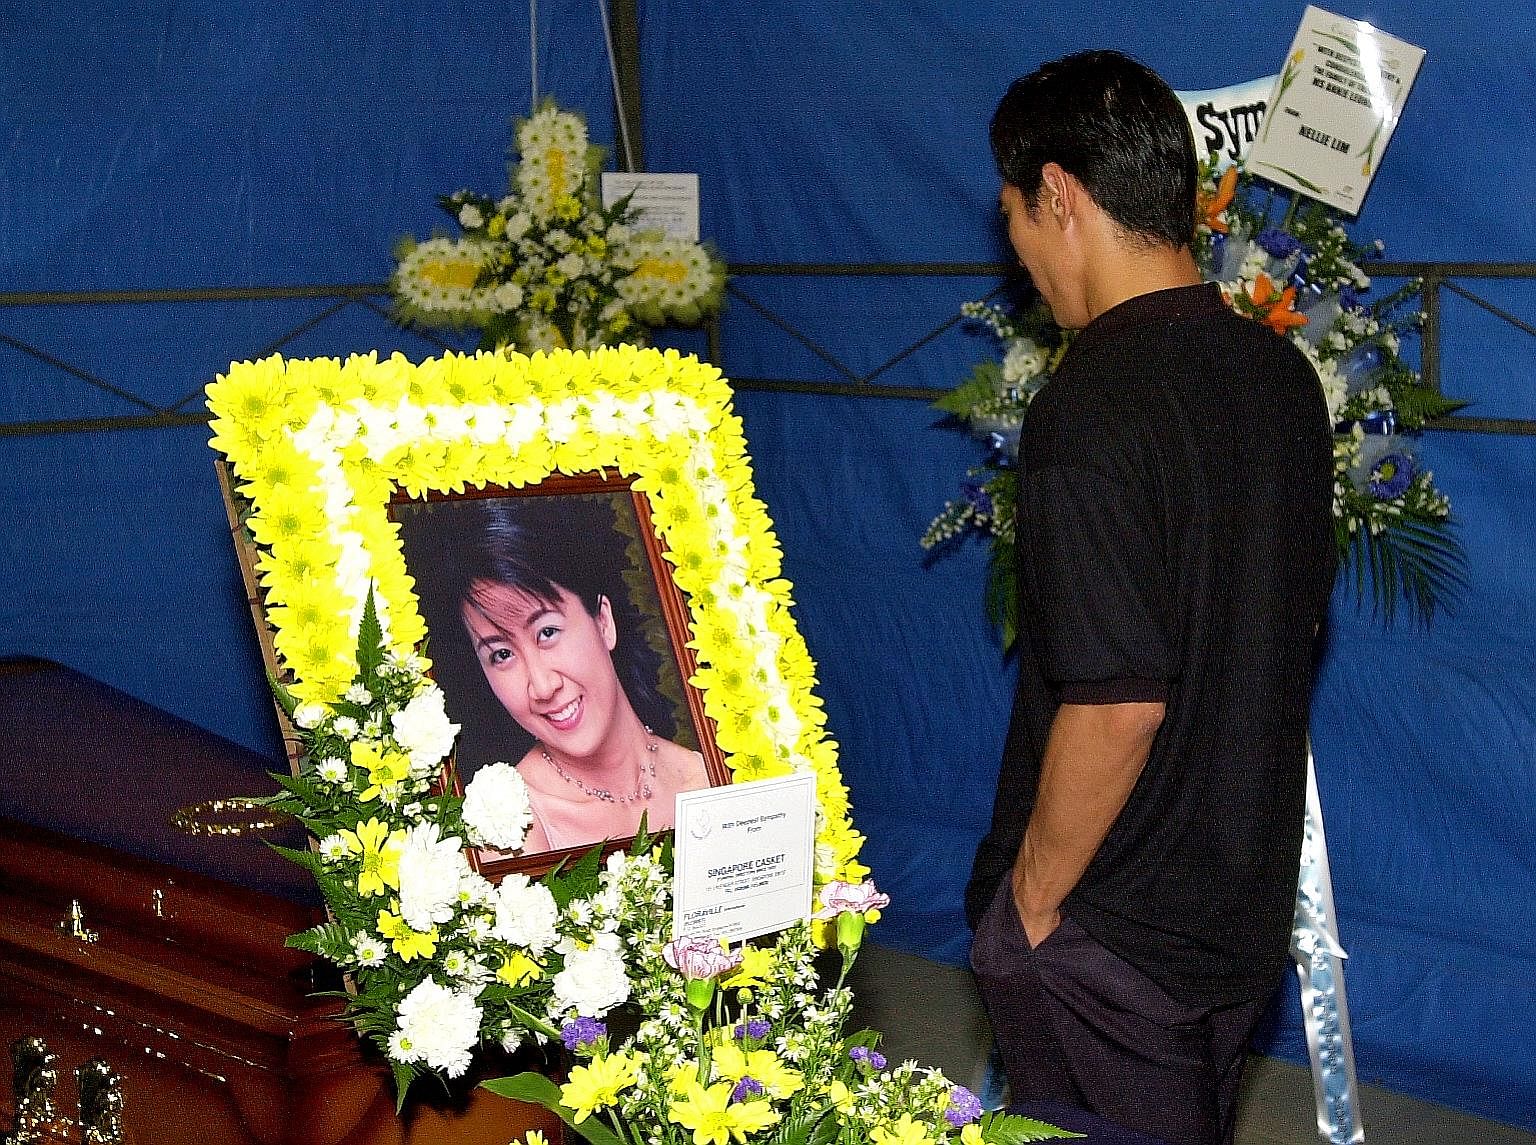 Left: The then 15-year-old, who killed Ms Annie Leong at the behest of her estranged husband Anthony Ler (above), leaving the High Court in November 2001. Below: Ler at Ms Leong's wake. He was hanged in December 2002 for abetment of murder.